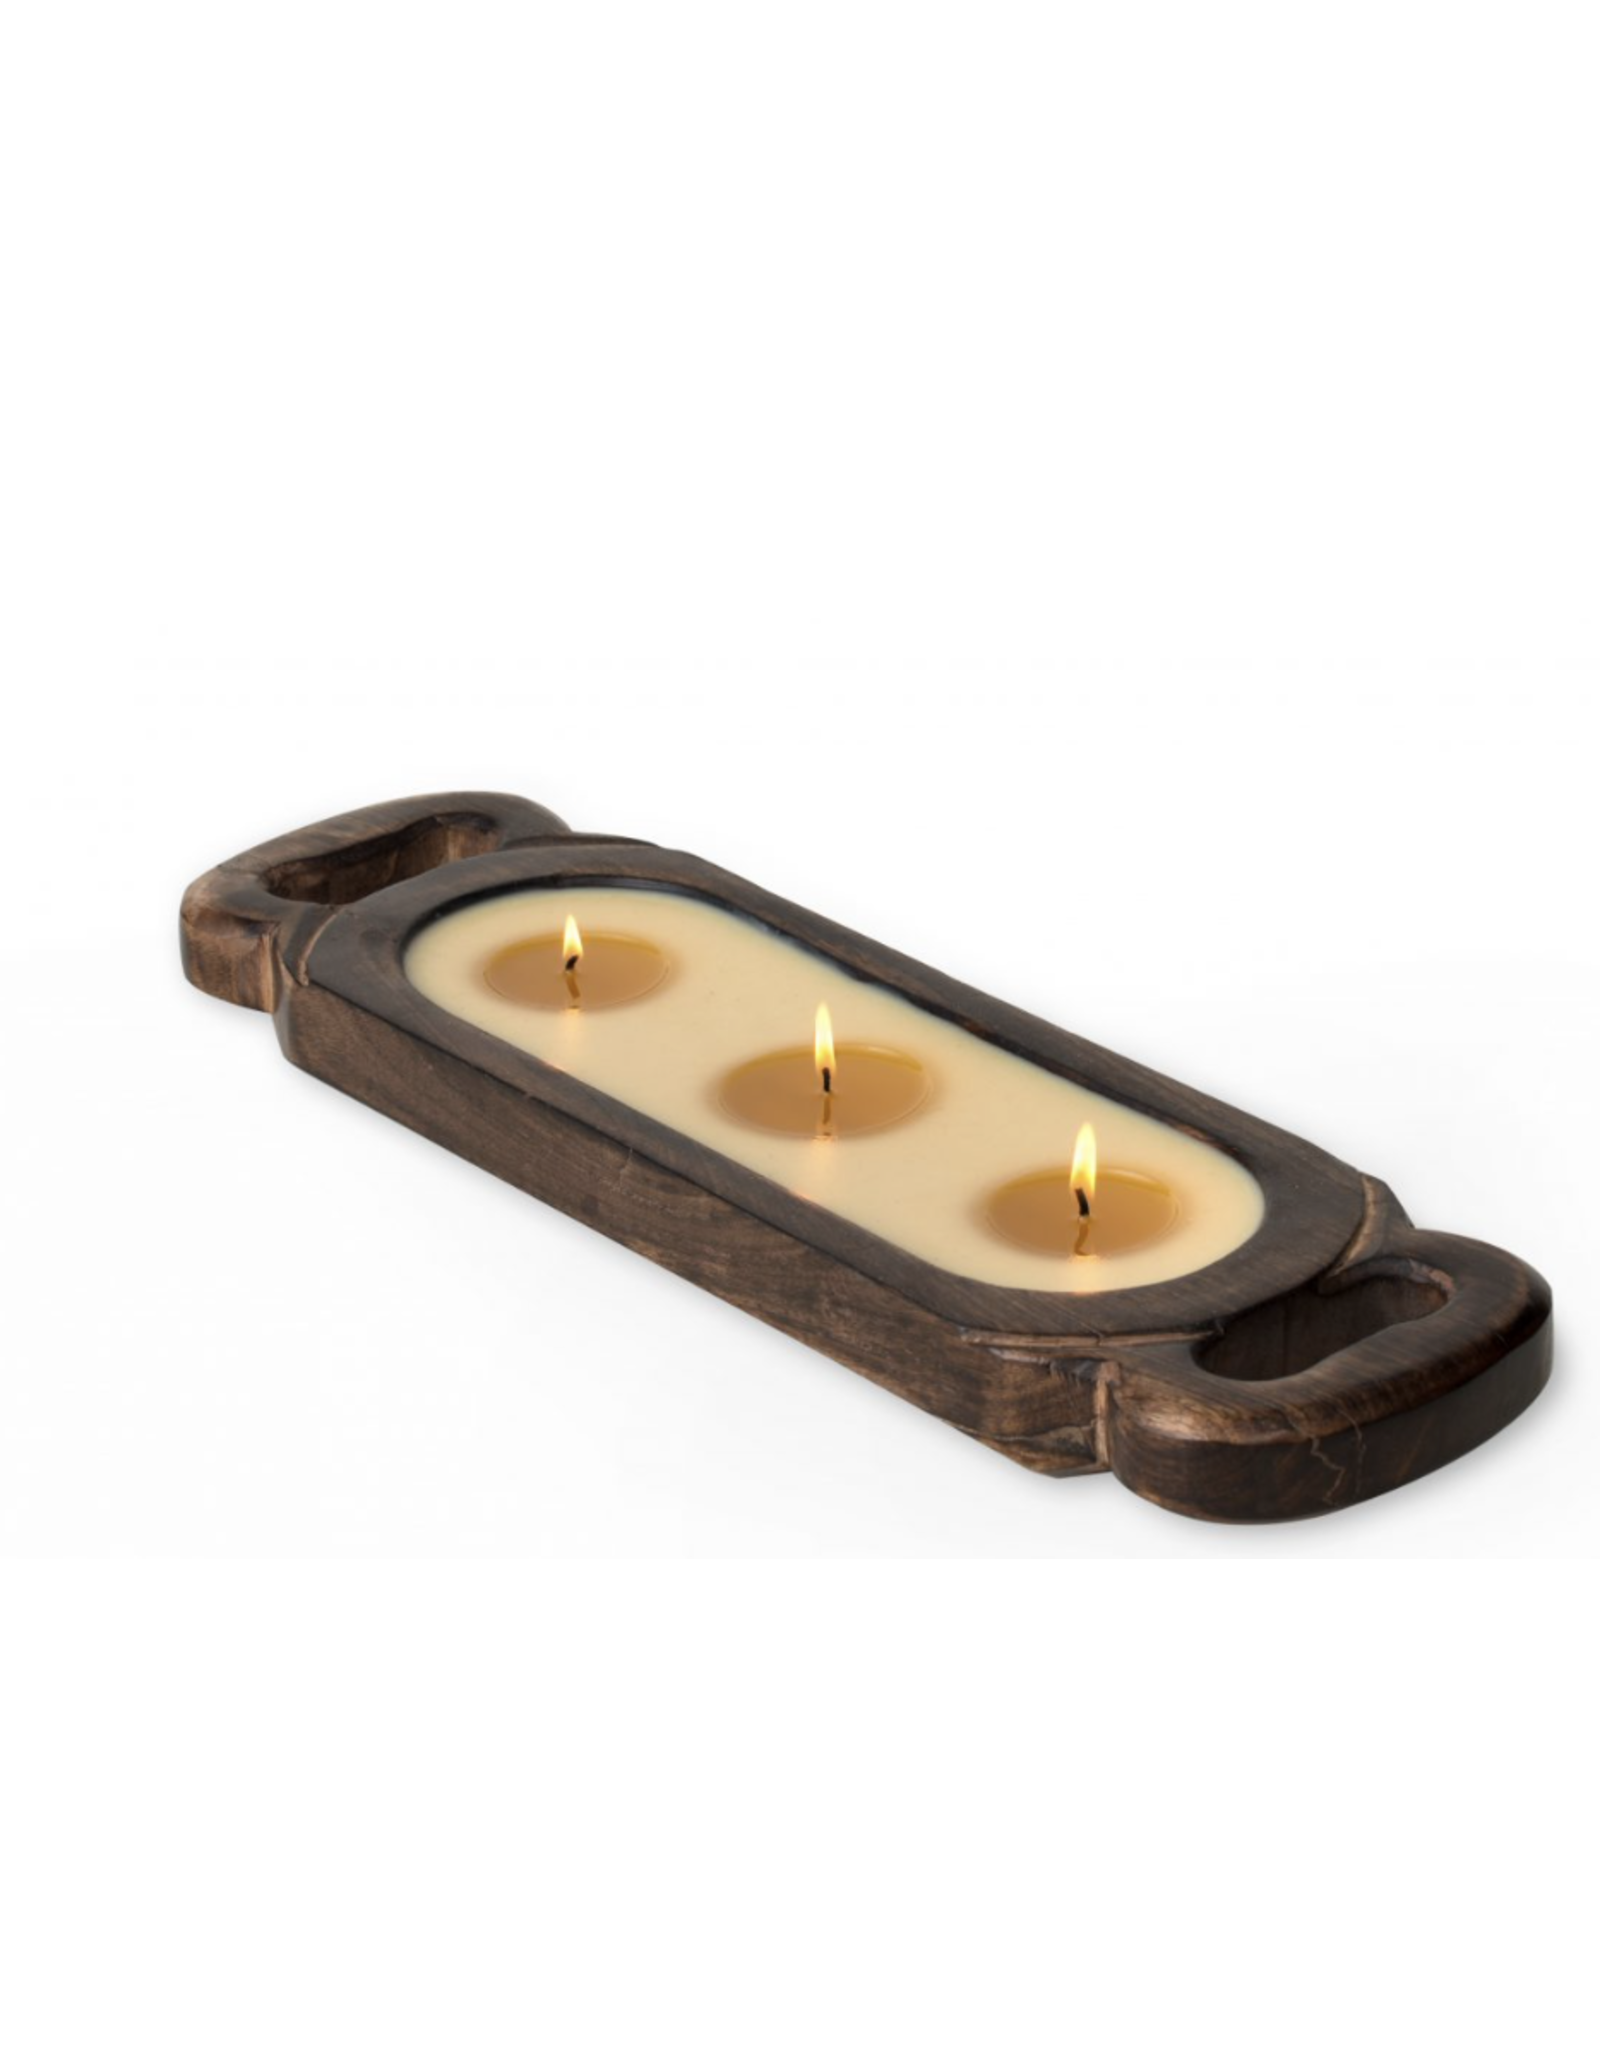 Small Wooden Candle Tray - Grapefruit Pine